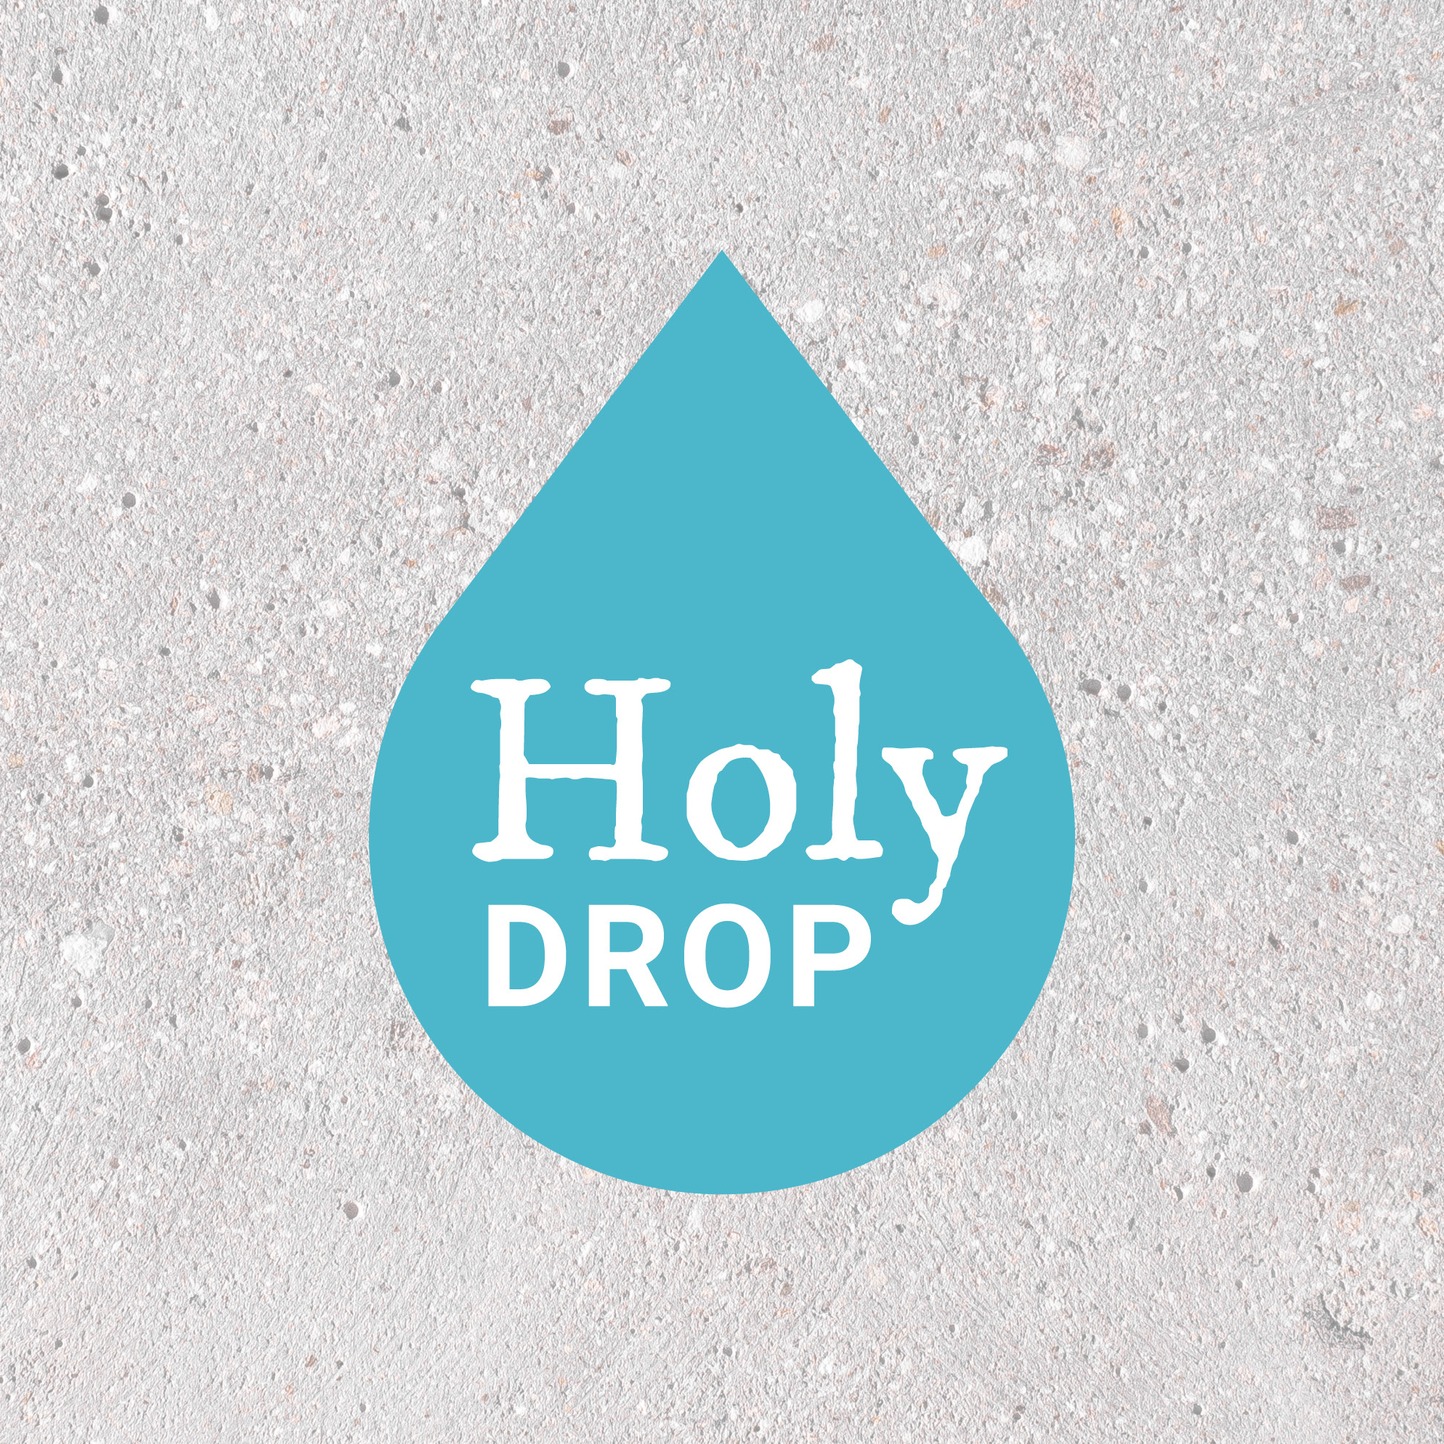 Holy Drop - acquasantiera automatica / automatic holy water dispenser